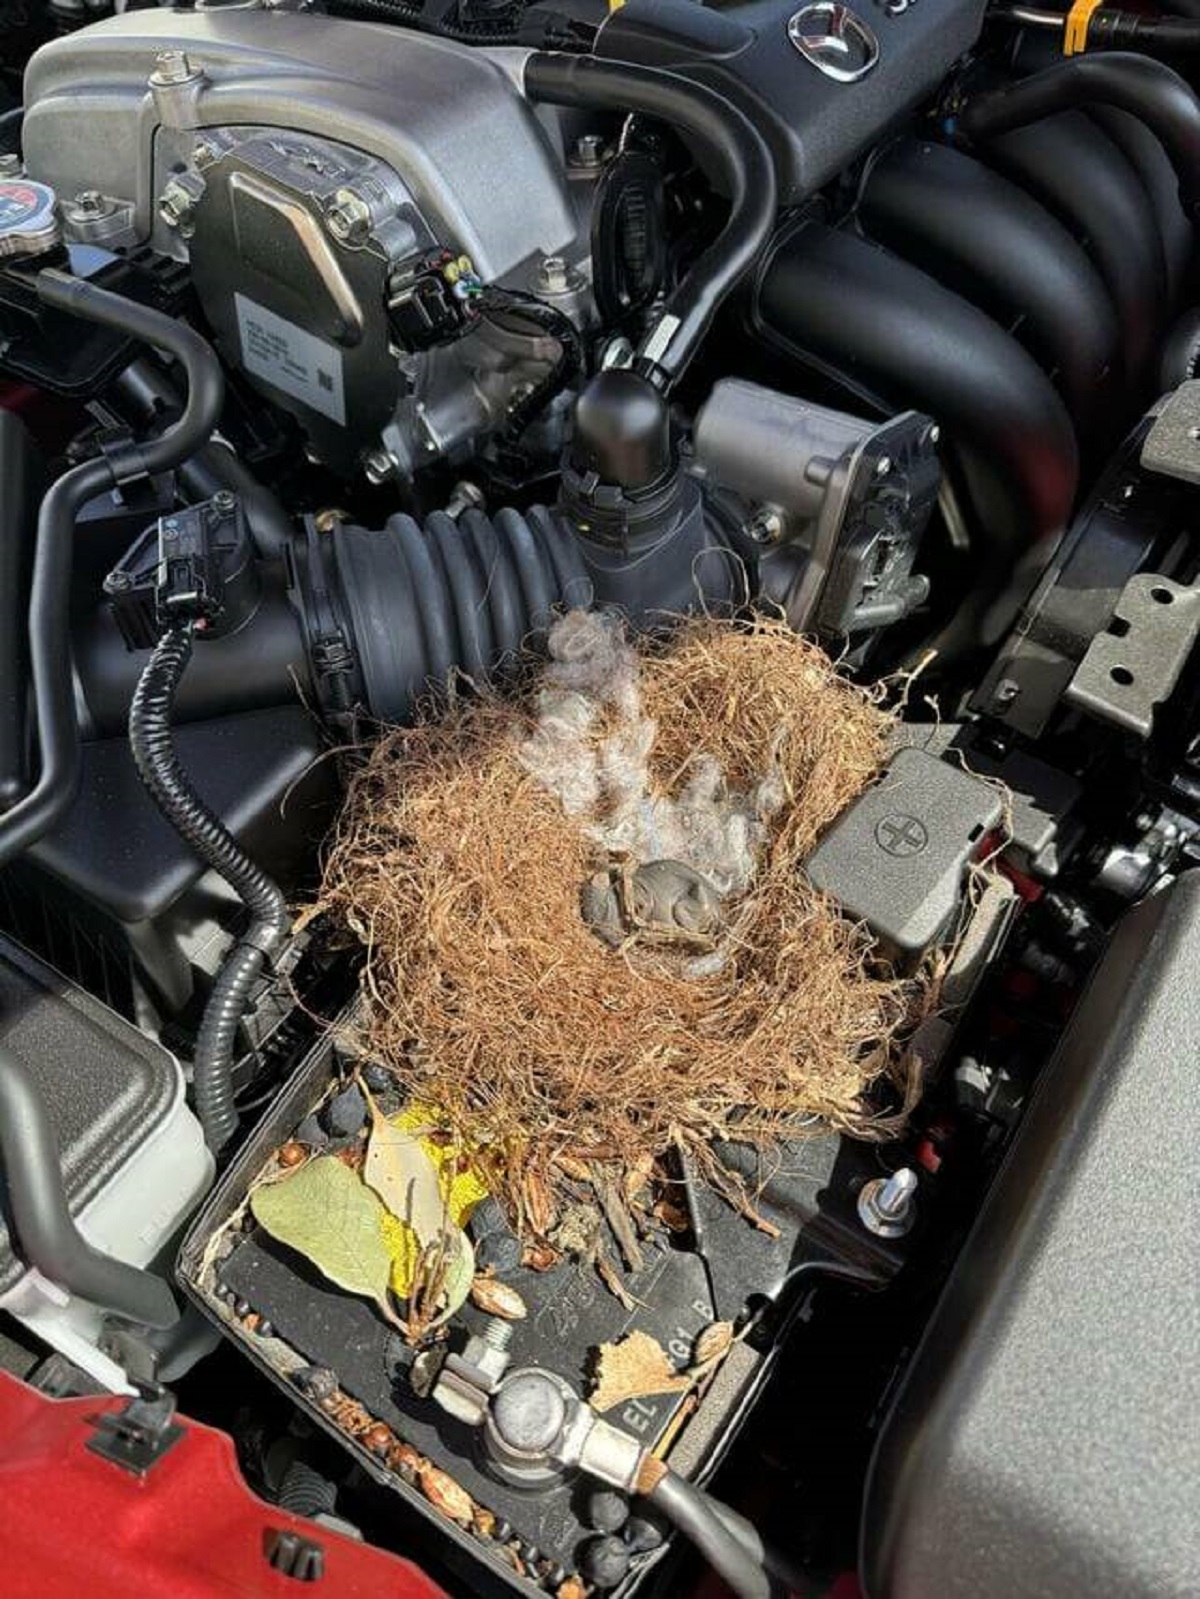 "Went to top off my wiper fluid and found this"